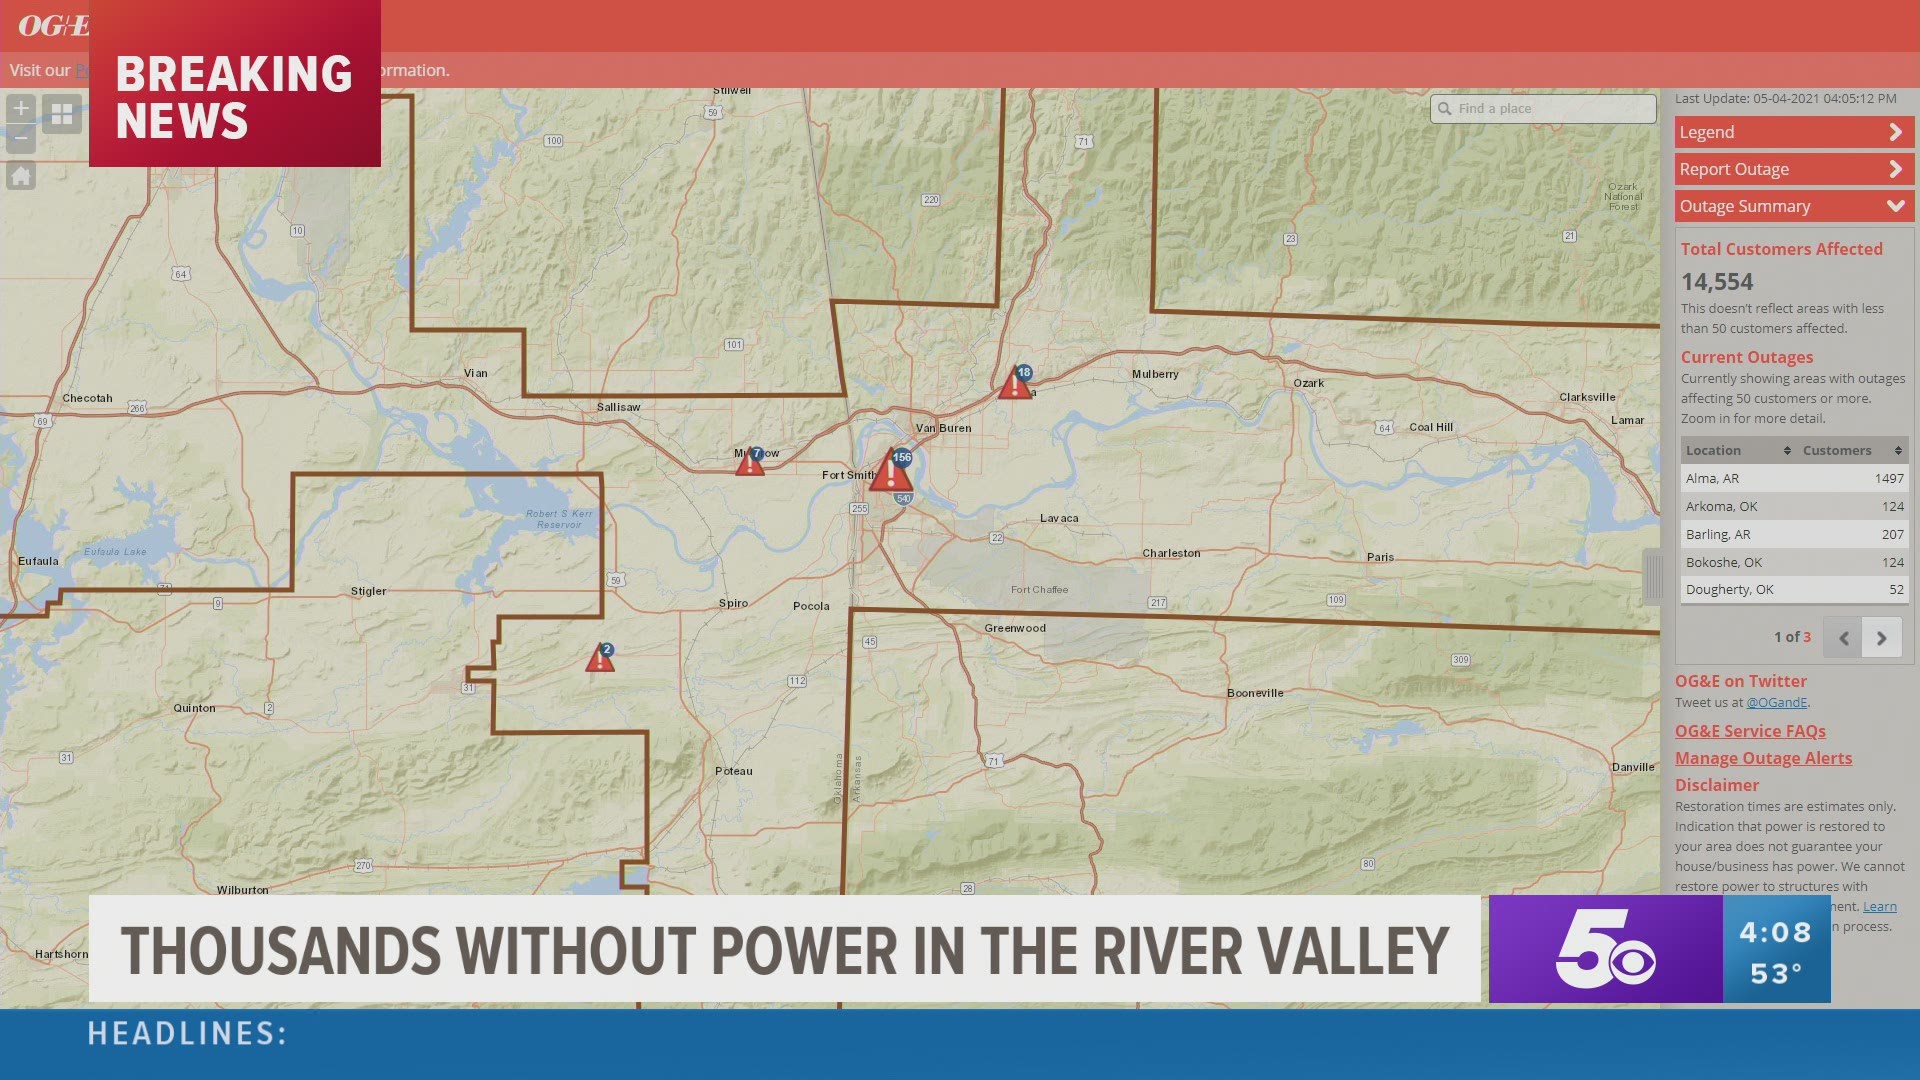 Nearly 16,000 customers remain without power in the River Valley.